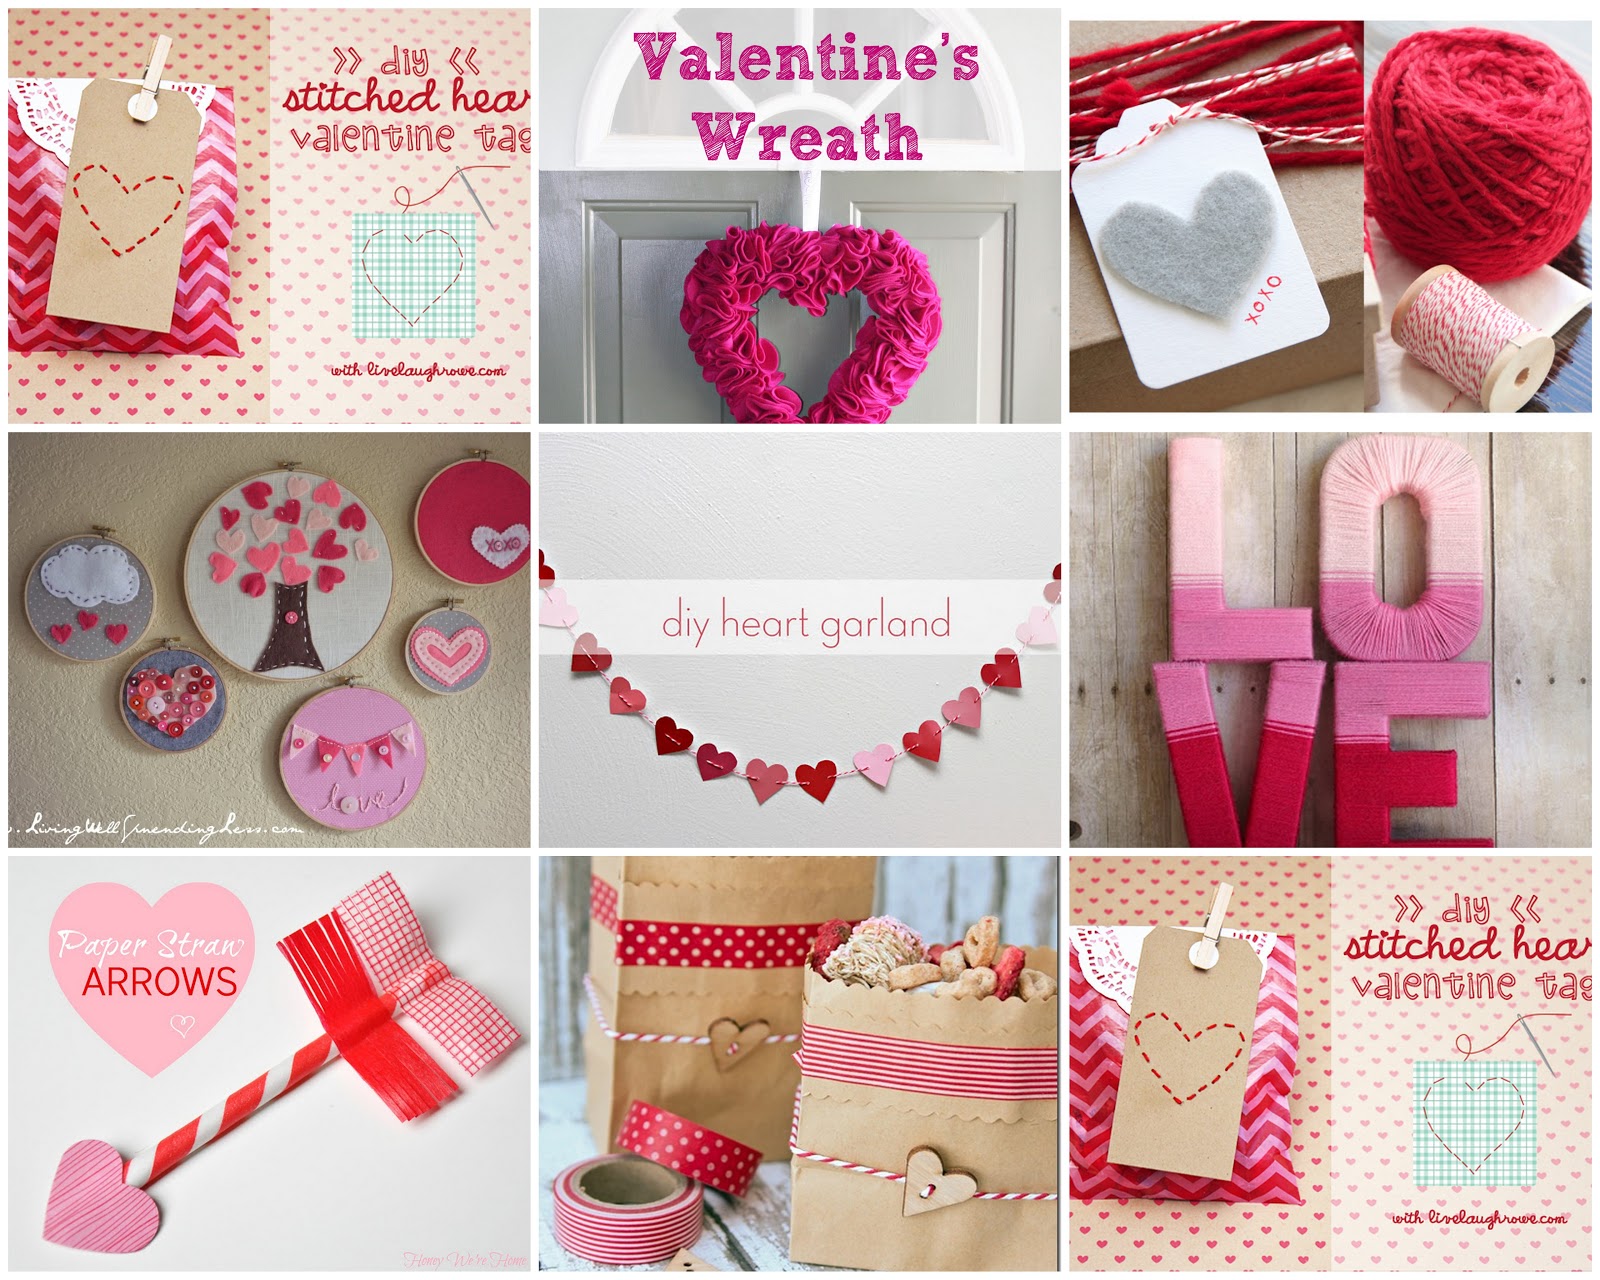 Lovely Little Life: Things I'm Loving Thursday : DIY Valentine's Day Projects